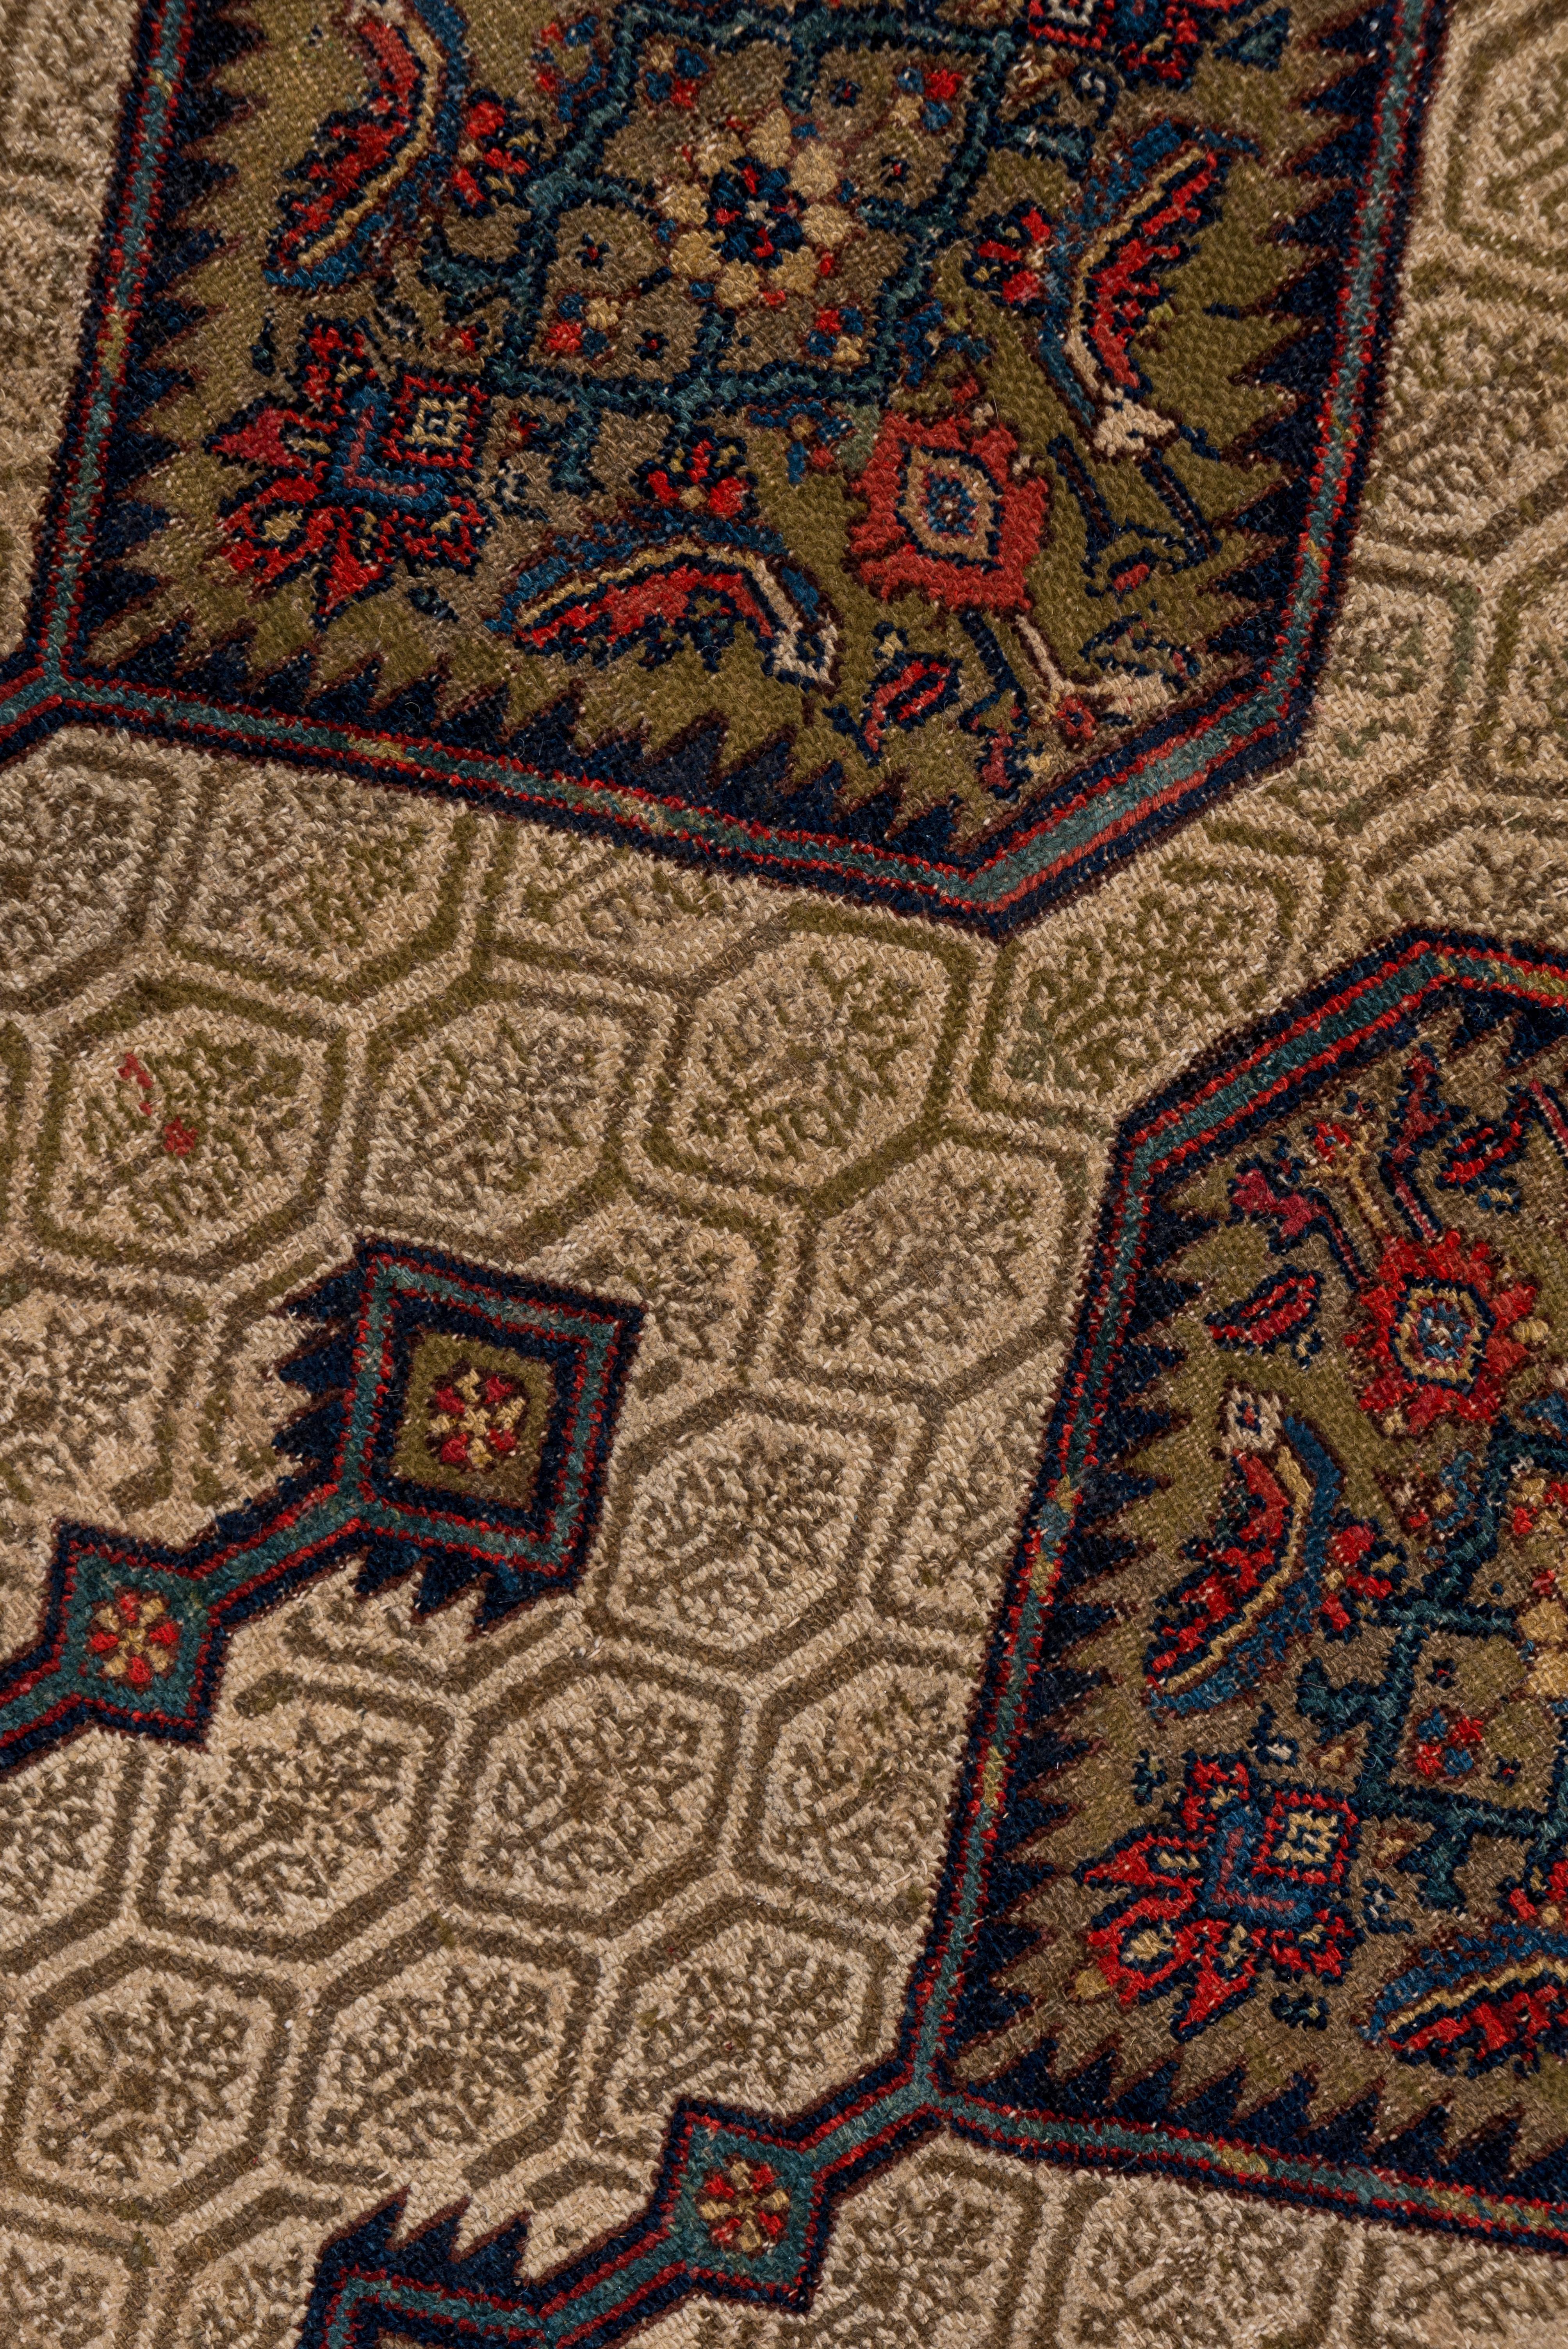 Within a broad, plain camel-tone border, this west Persian village carpet presents a cream field with a small hexagon and flower all-over pattern underlying full and partial large medallions with internal Herati patterns accented in green, dark